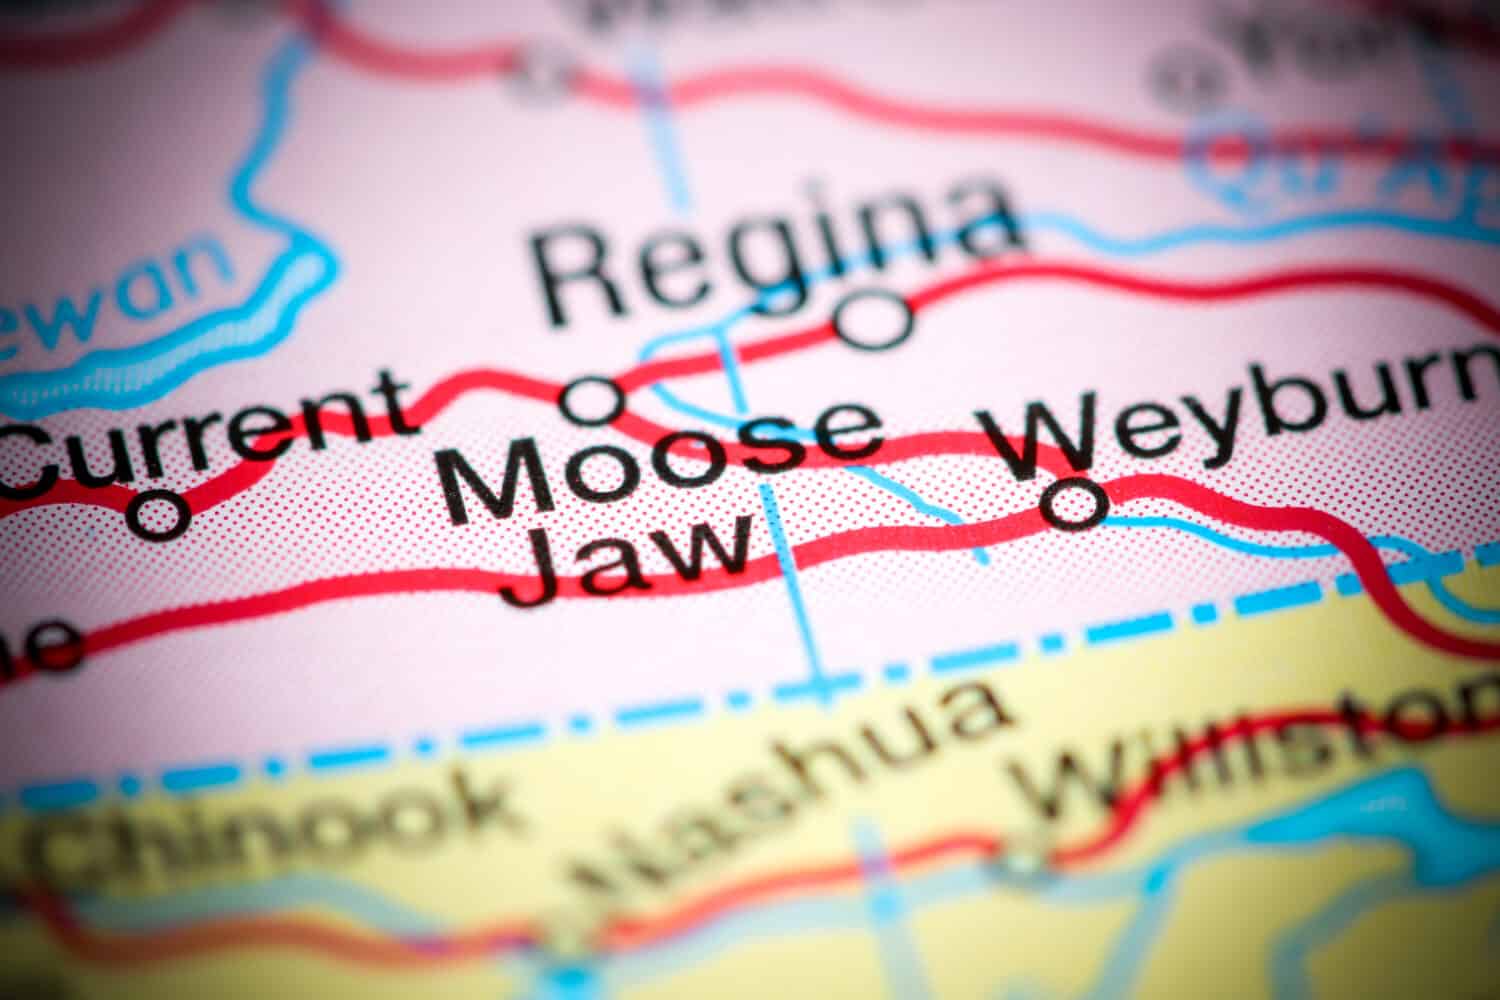 Moose Jaw. Canada on a map